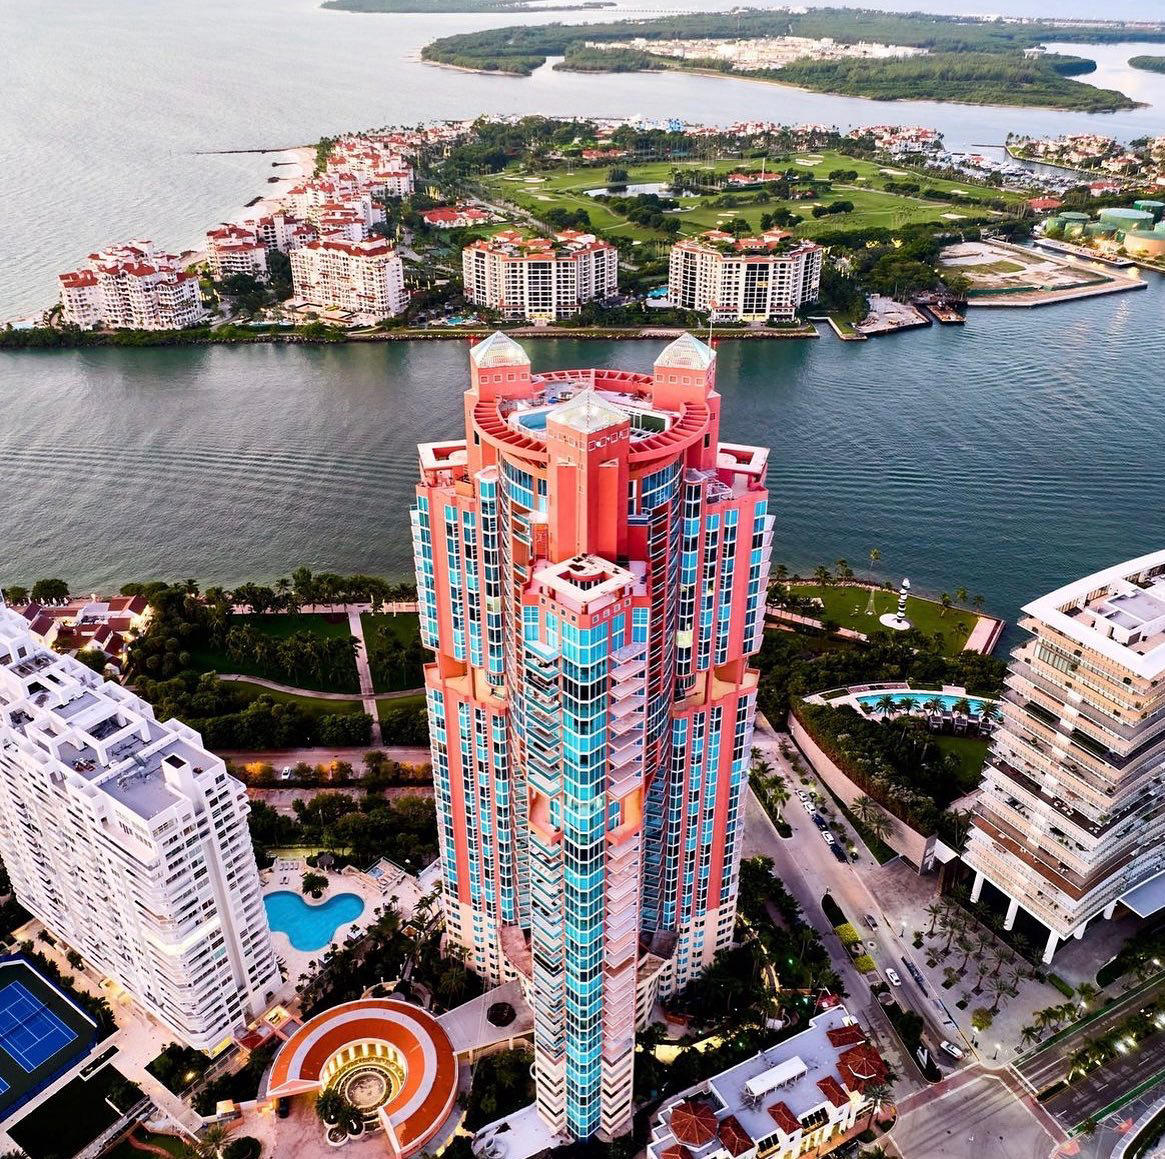 image  1 Miami - The Portofino is one of the most recognizable and iconic buildings on Miami Beach